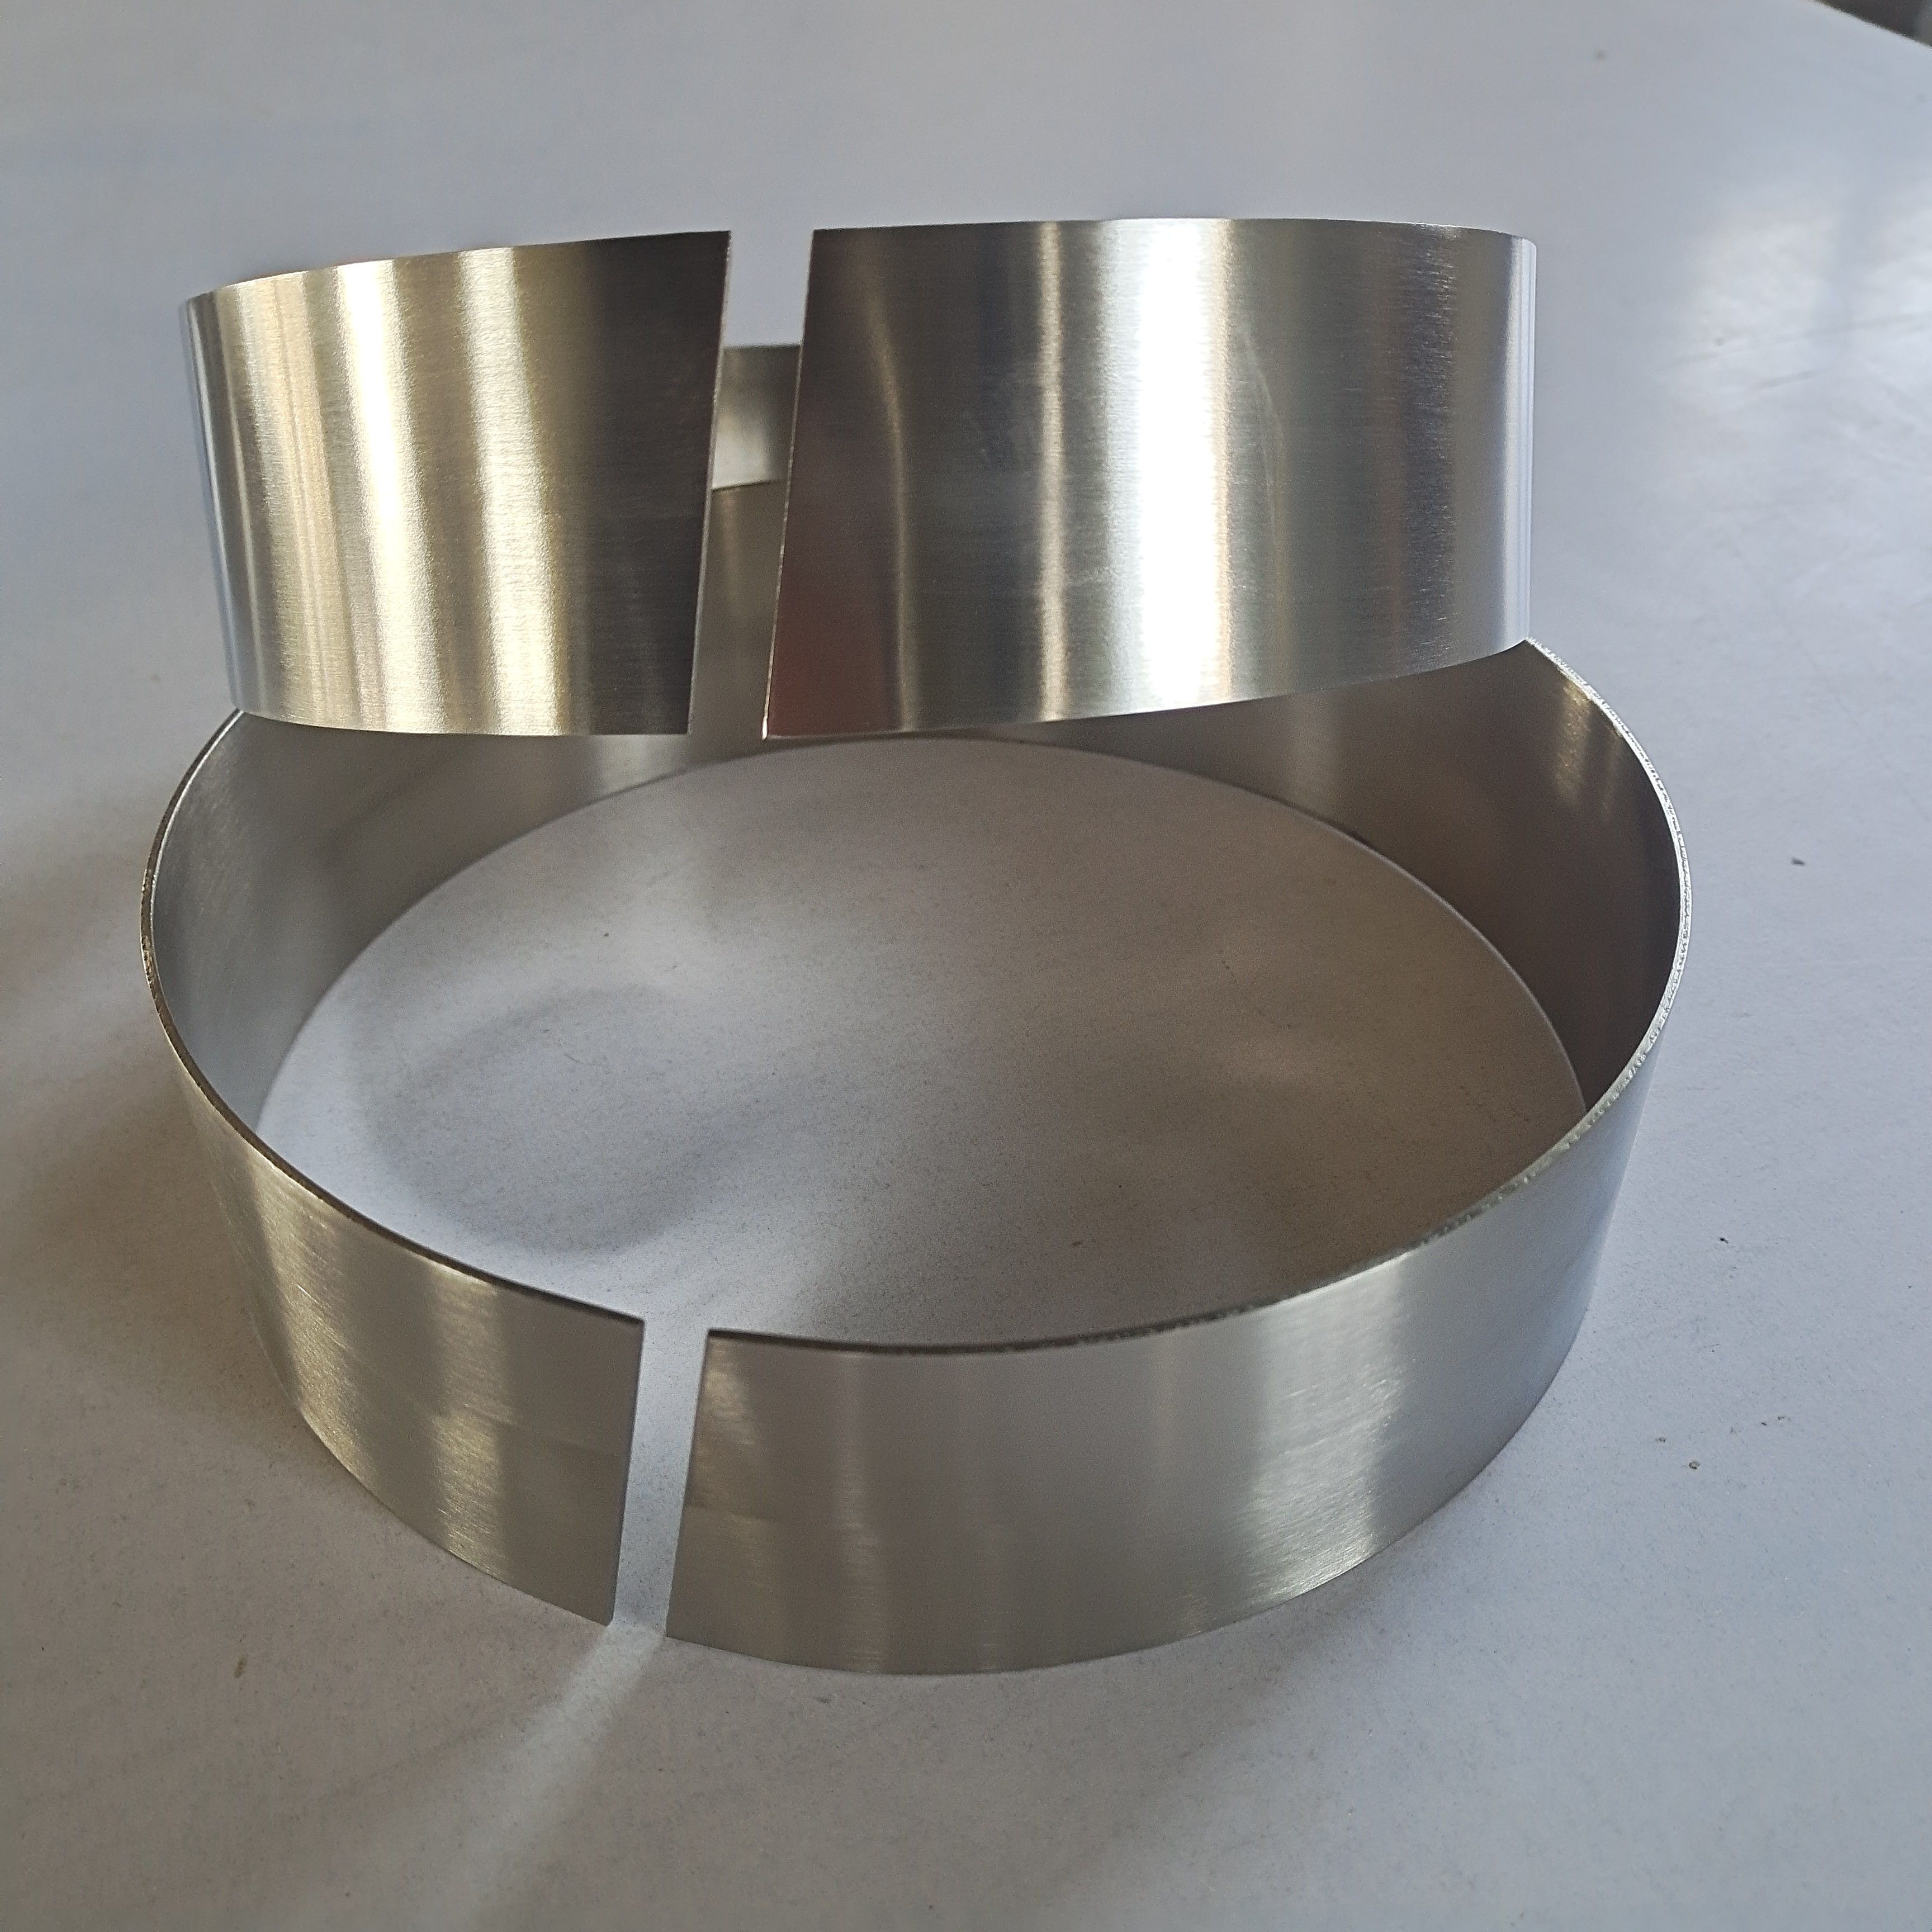 nickel annealing rings and annealing band for resistant annealers for Niehoff Frigeco Samp Sictra